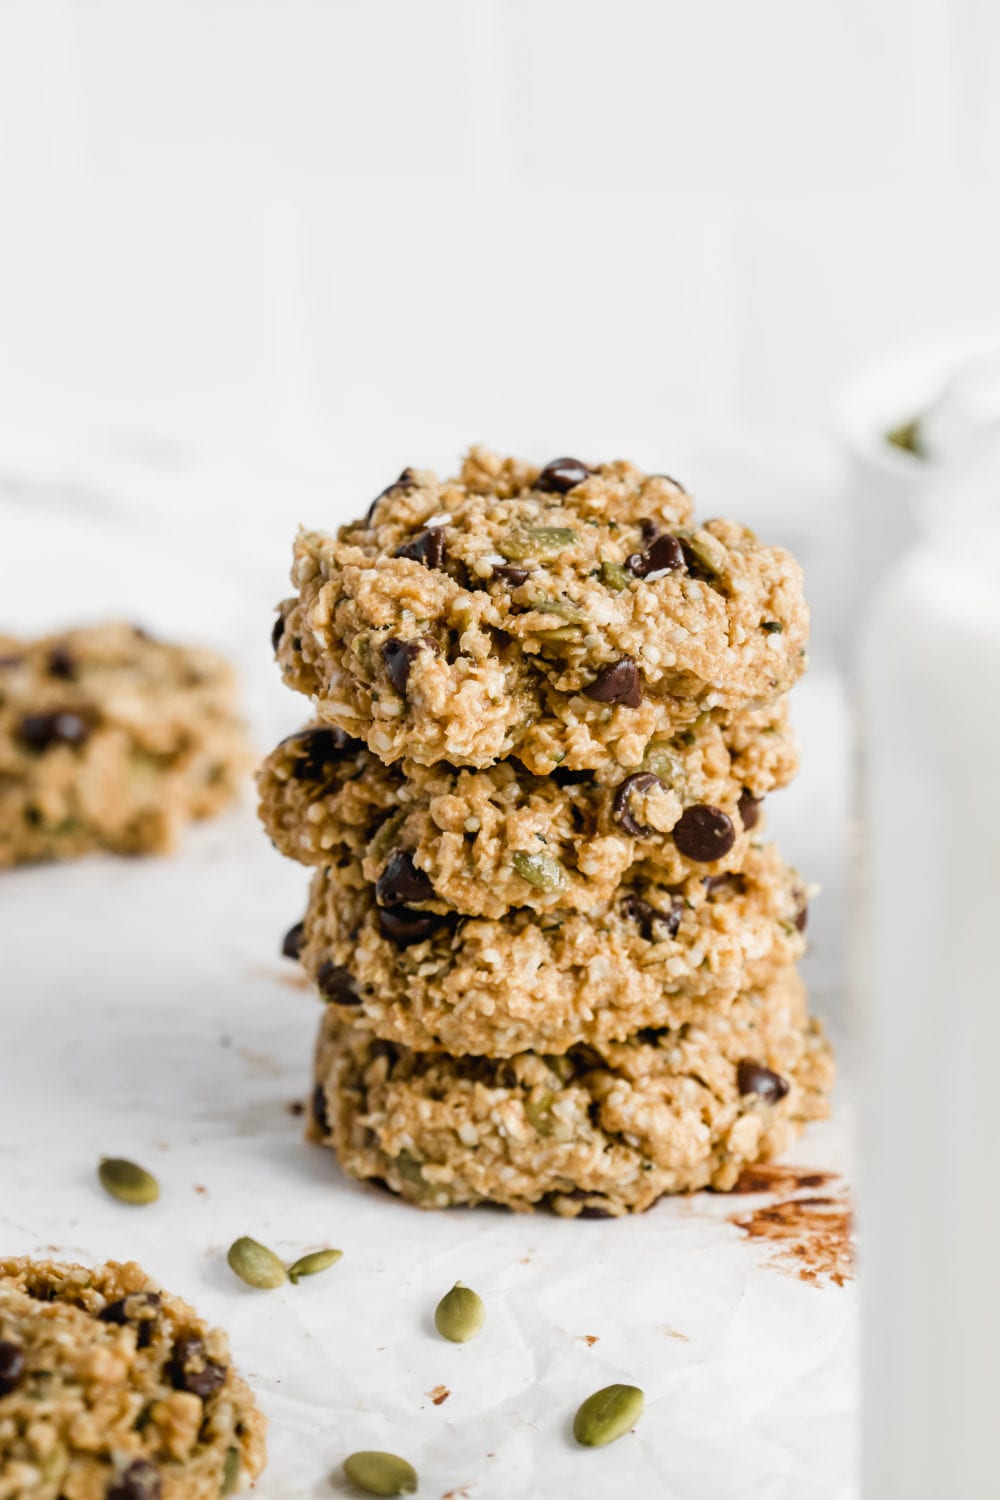 https://basicswithbails.com/wp-content/uploads/2020/07/superfood-gluten-free-protein-breakfast-cookies-scaled.jpg